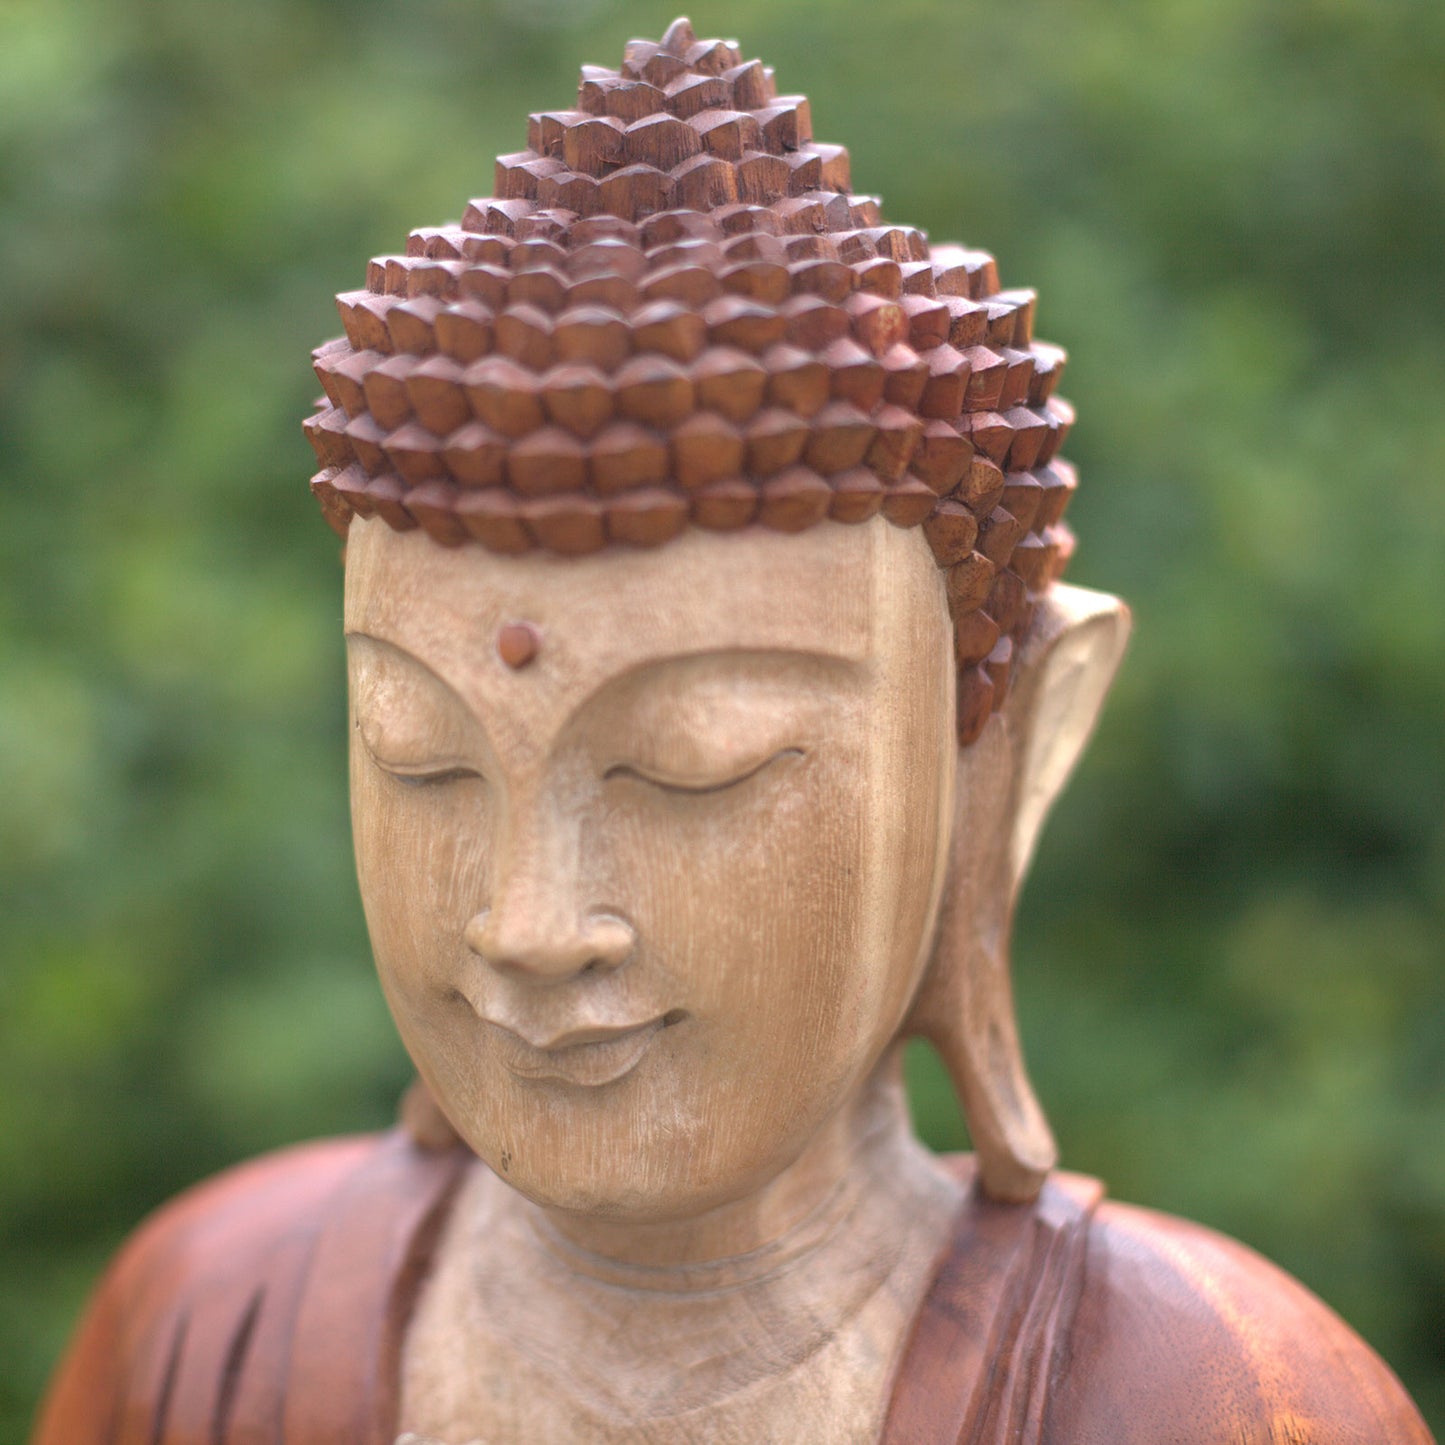 Hand Carved Buddha Statue - 30cm Hand Down